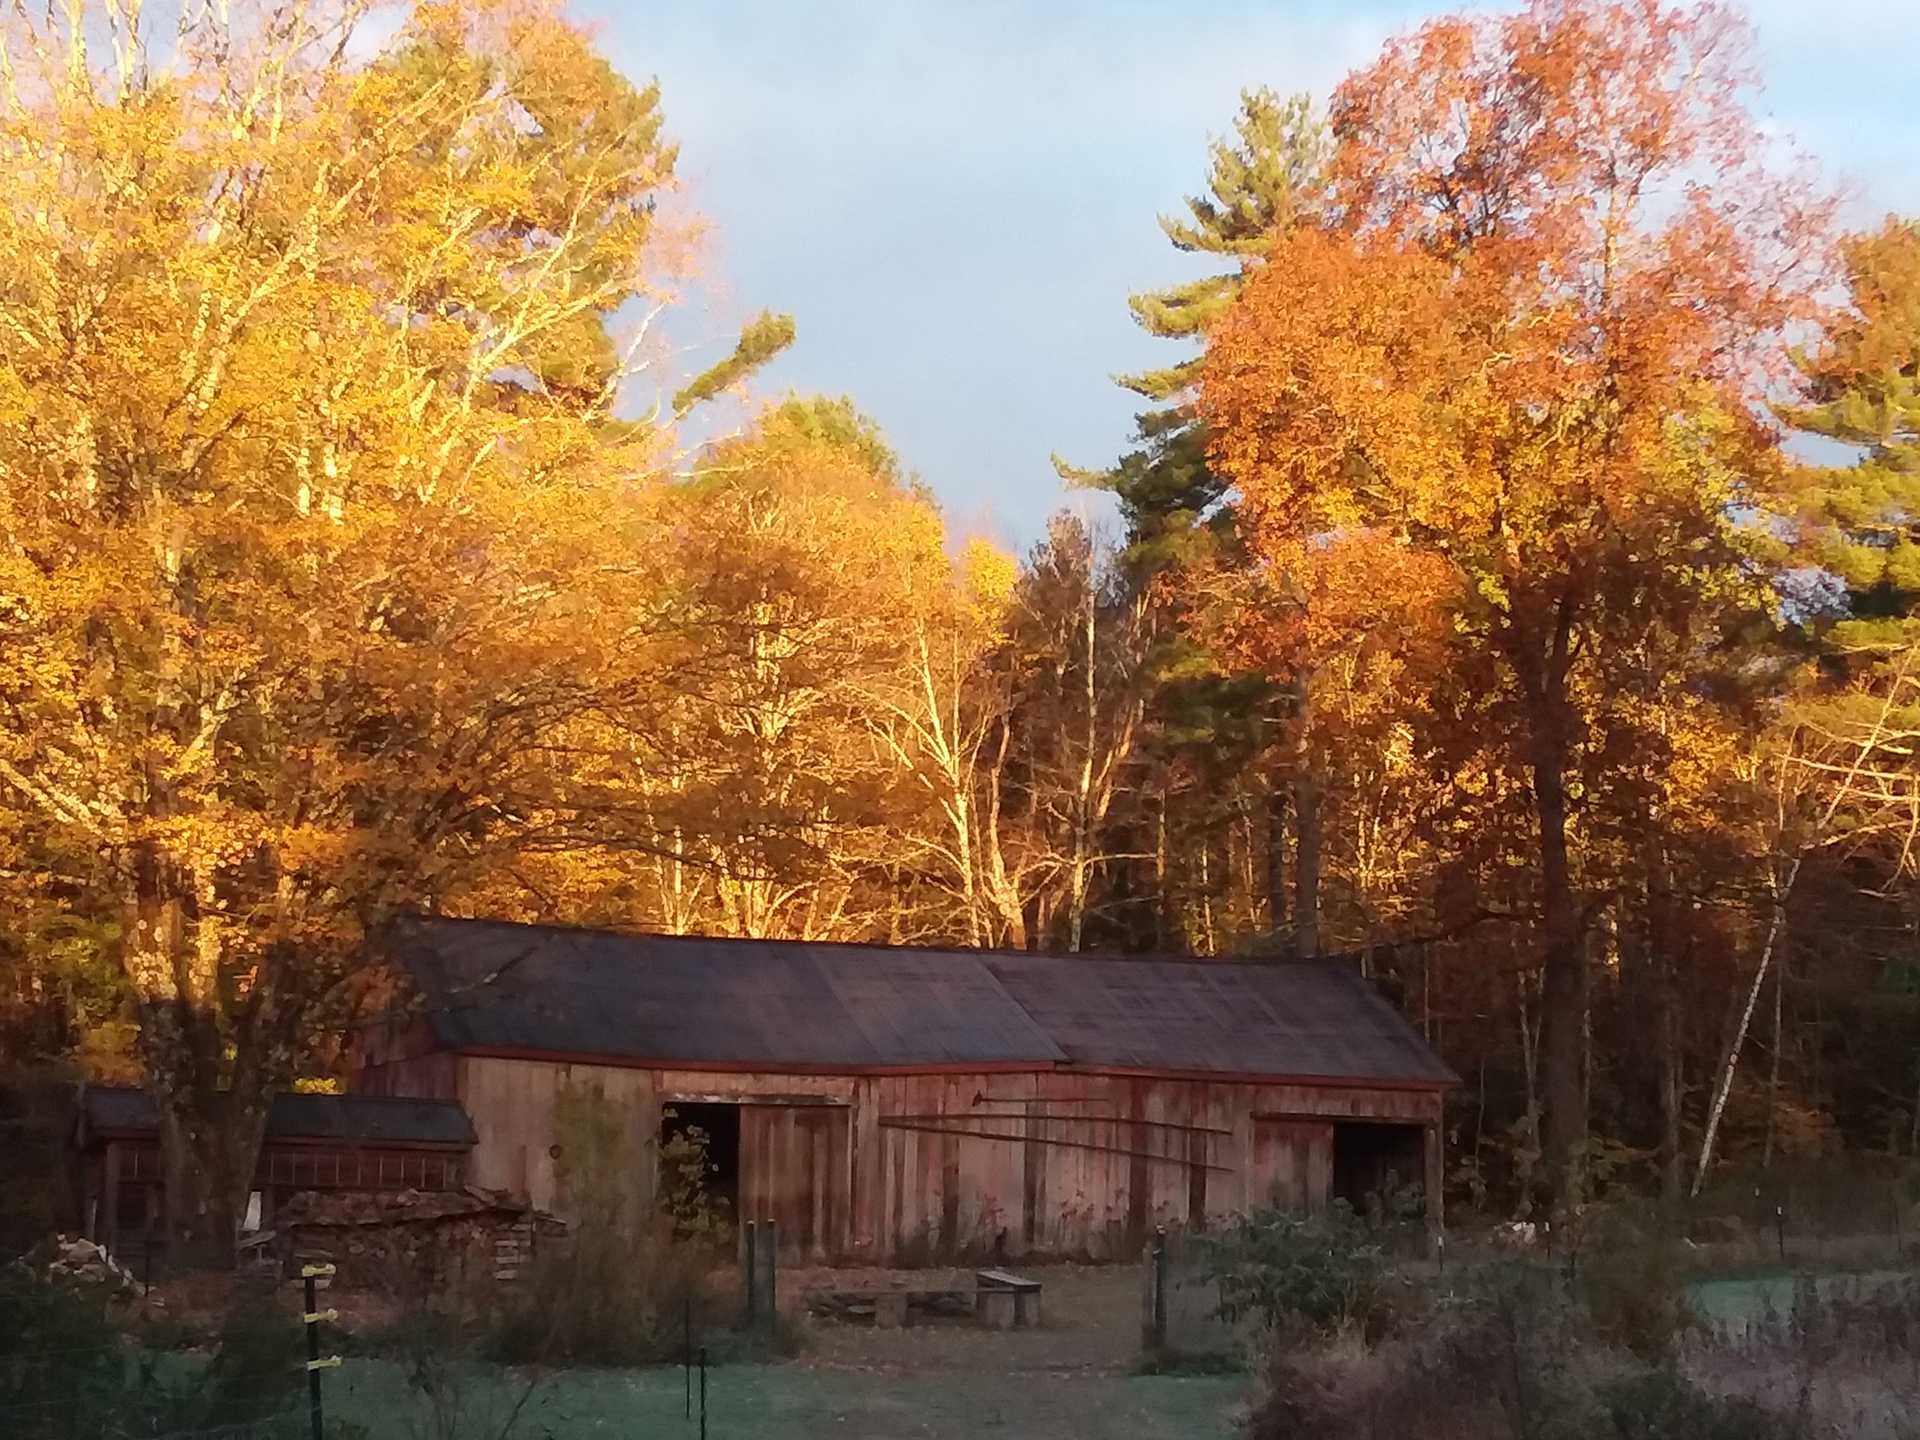 Pfersick Barn Autumn Leaves 2018,10-22 cropped reduced